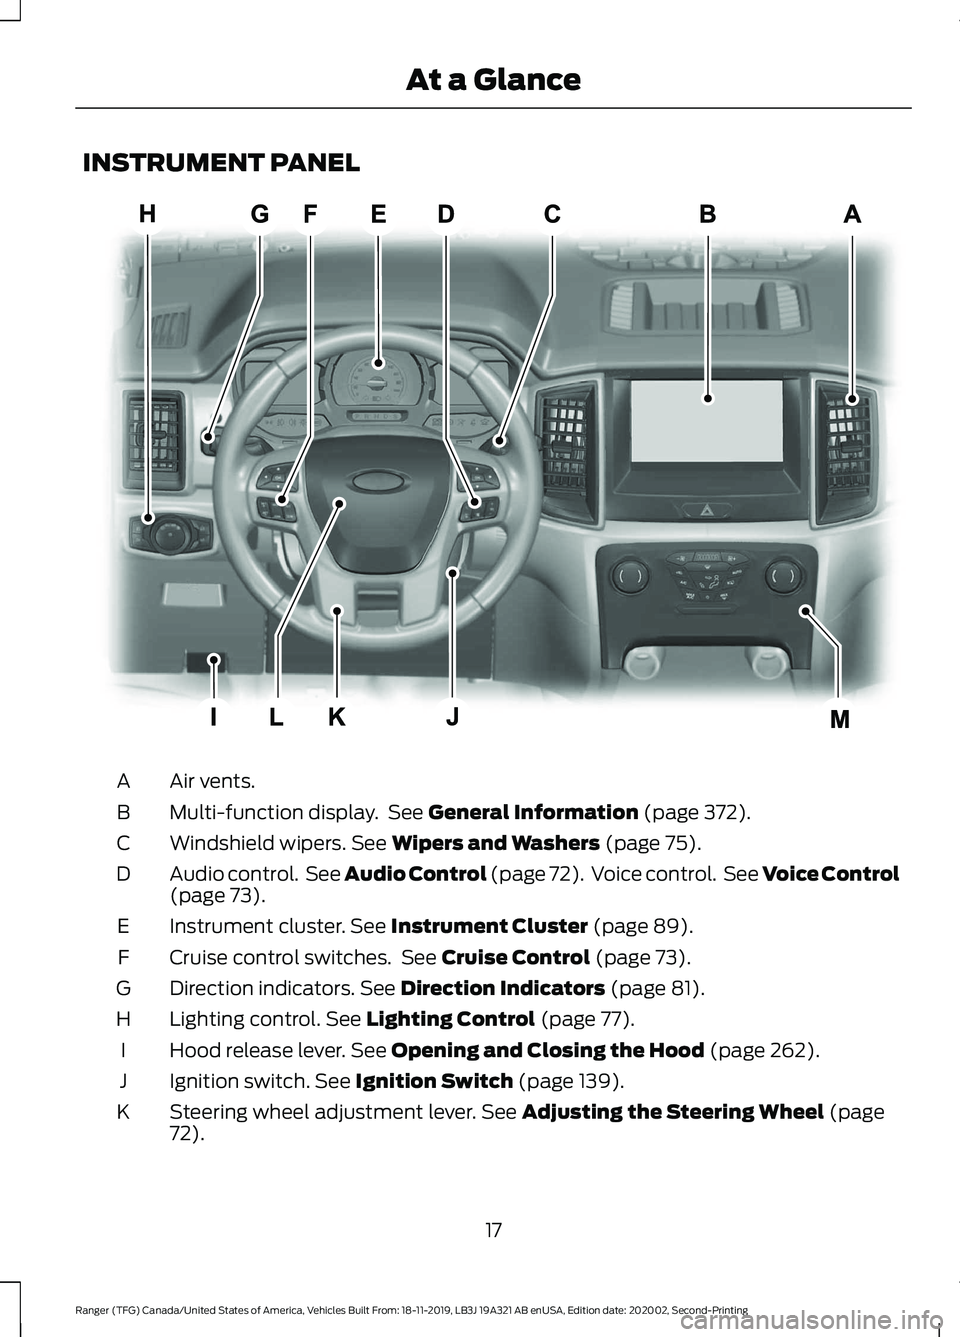 FORD RANGER 2020  Owners Manual INSTRUMENT PANEL
Air vents.
A
Multi-function display.  See General Information (page 372).
B
Windshield wipers.
 See Wipers and Washers (page 75).
C
Audio control.  See Audio Control (page 72).  Voice